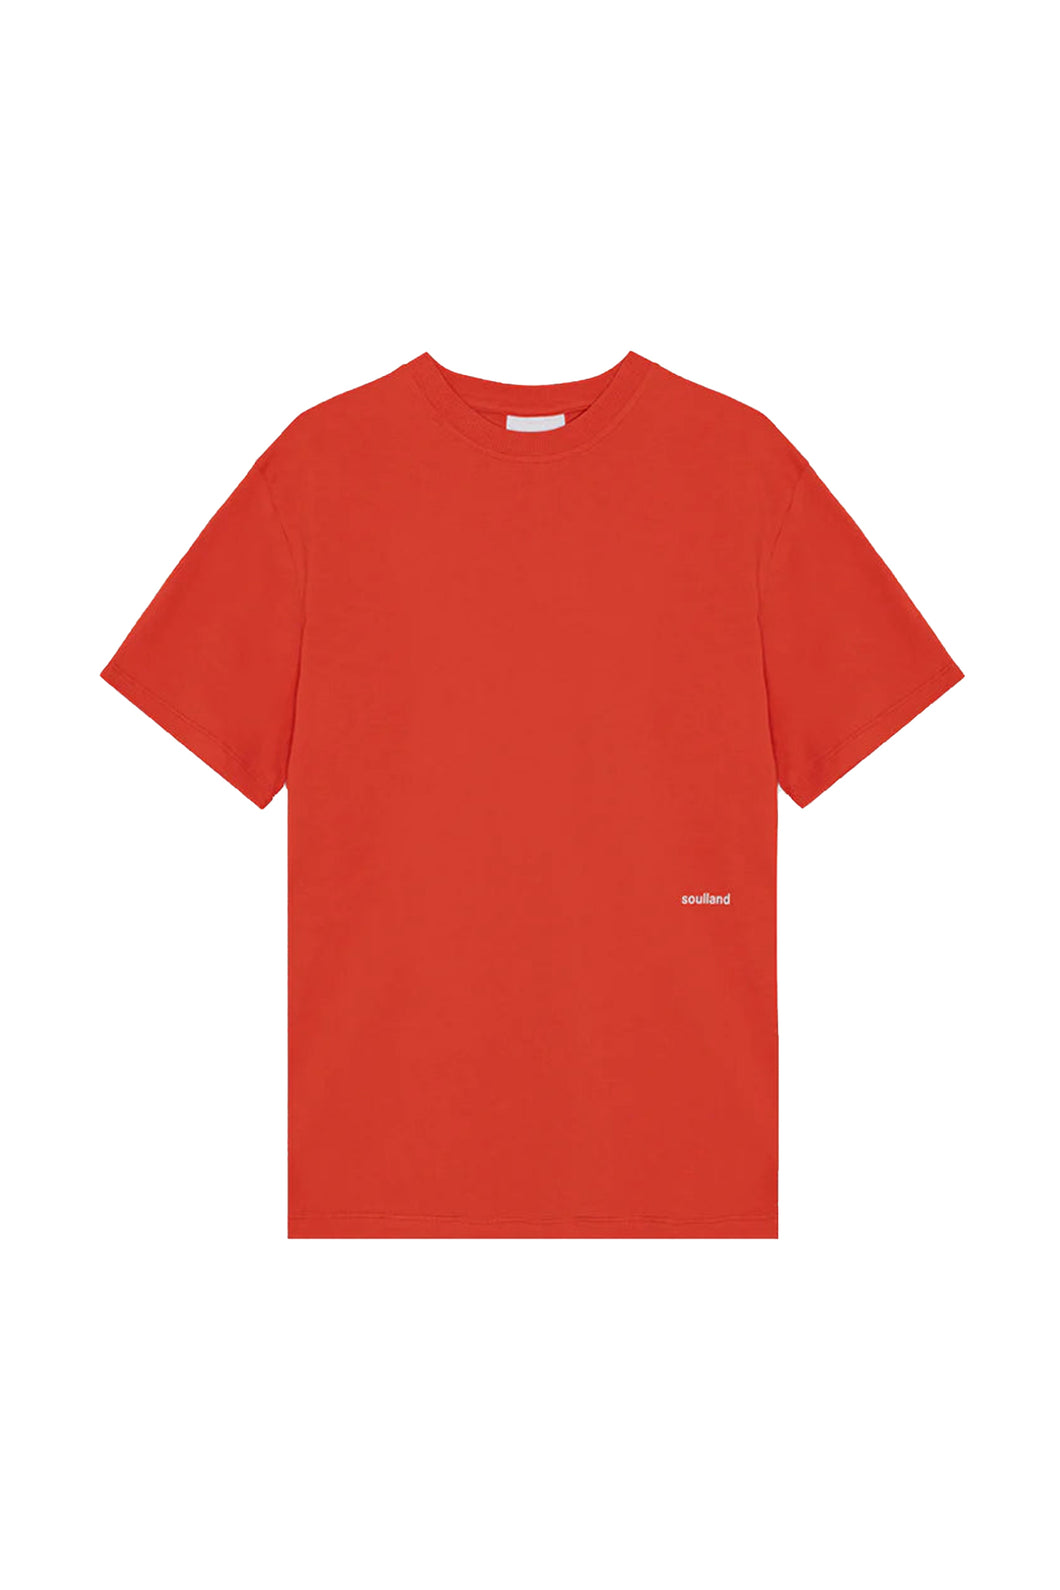 CEA T-SHIRT - RED